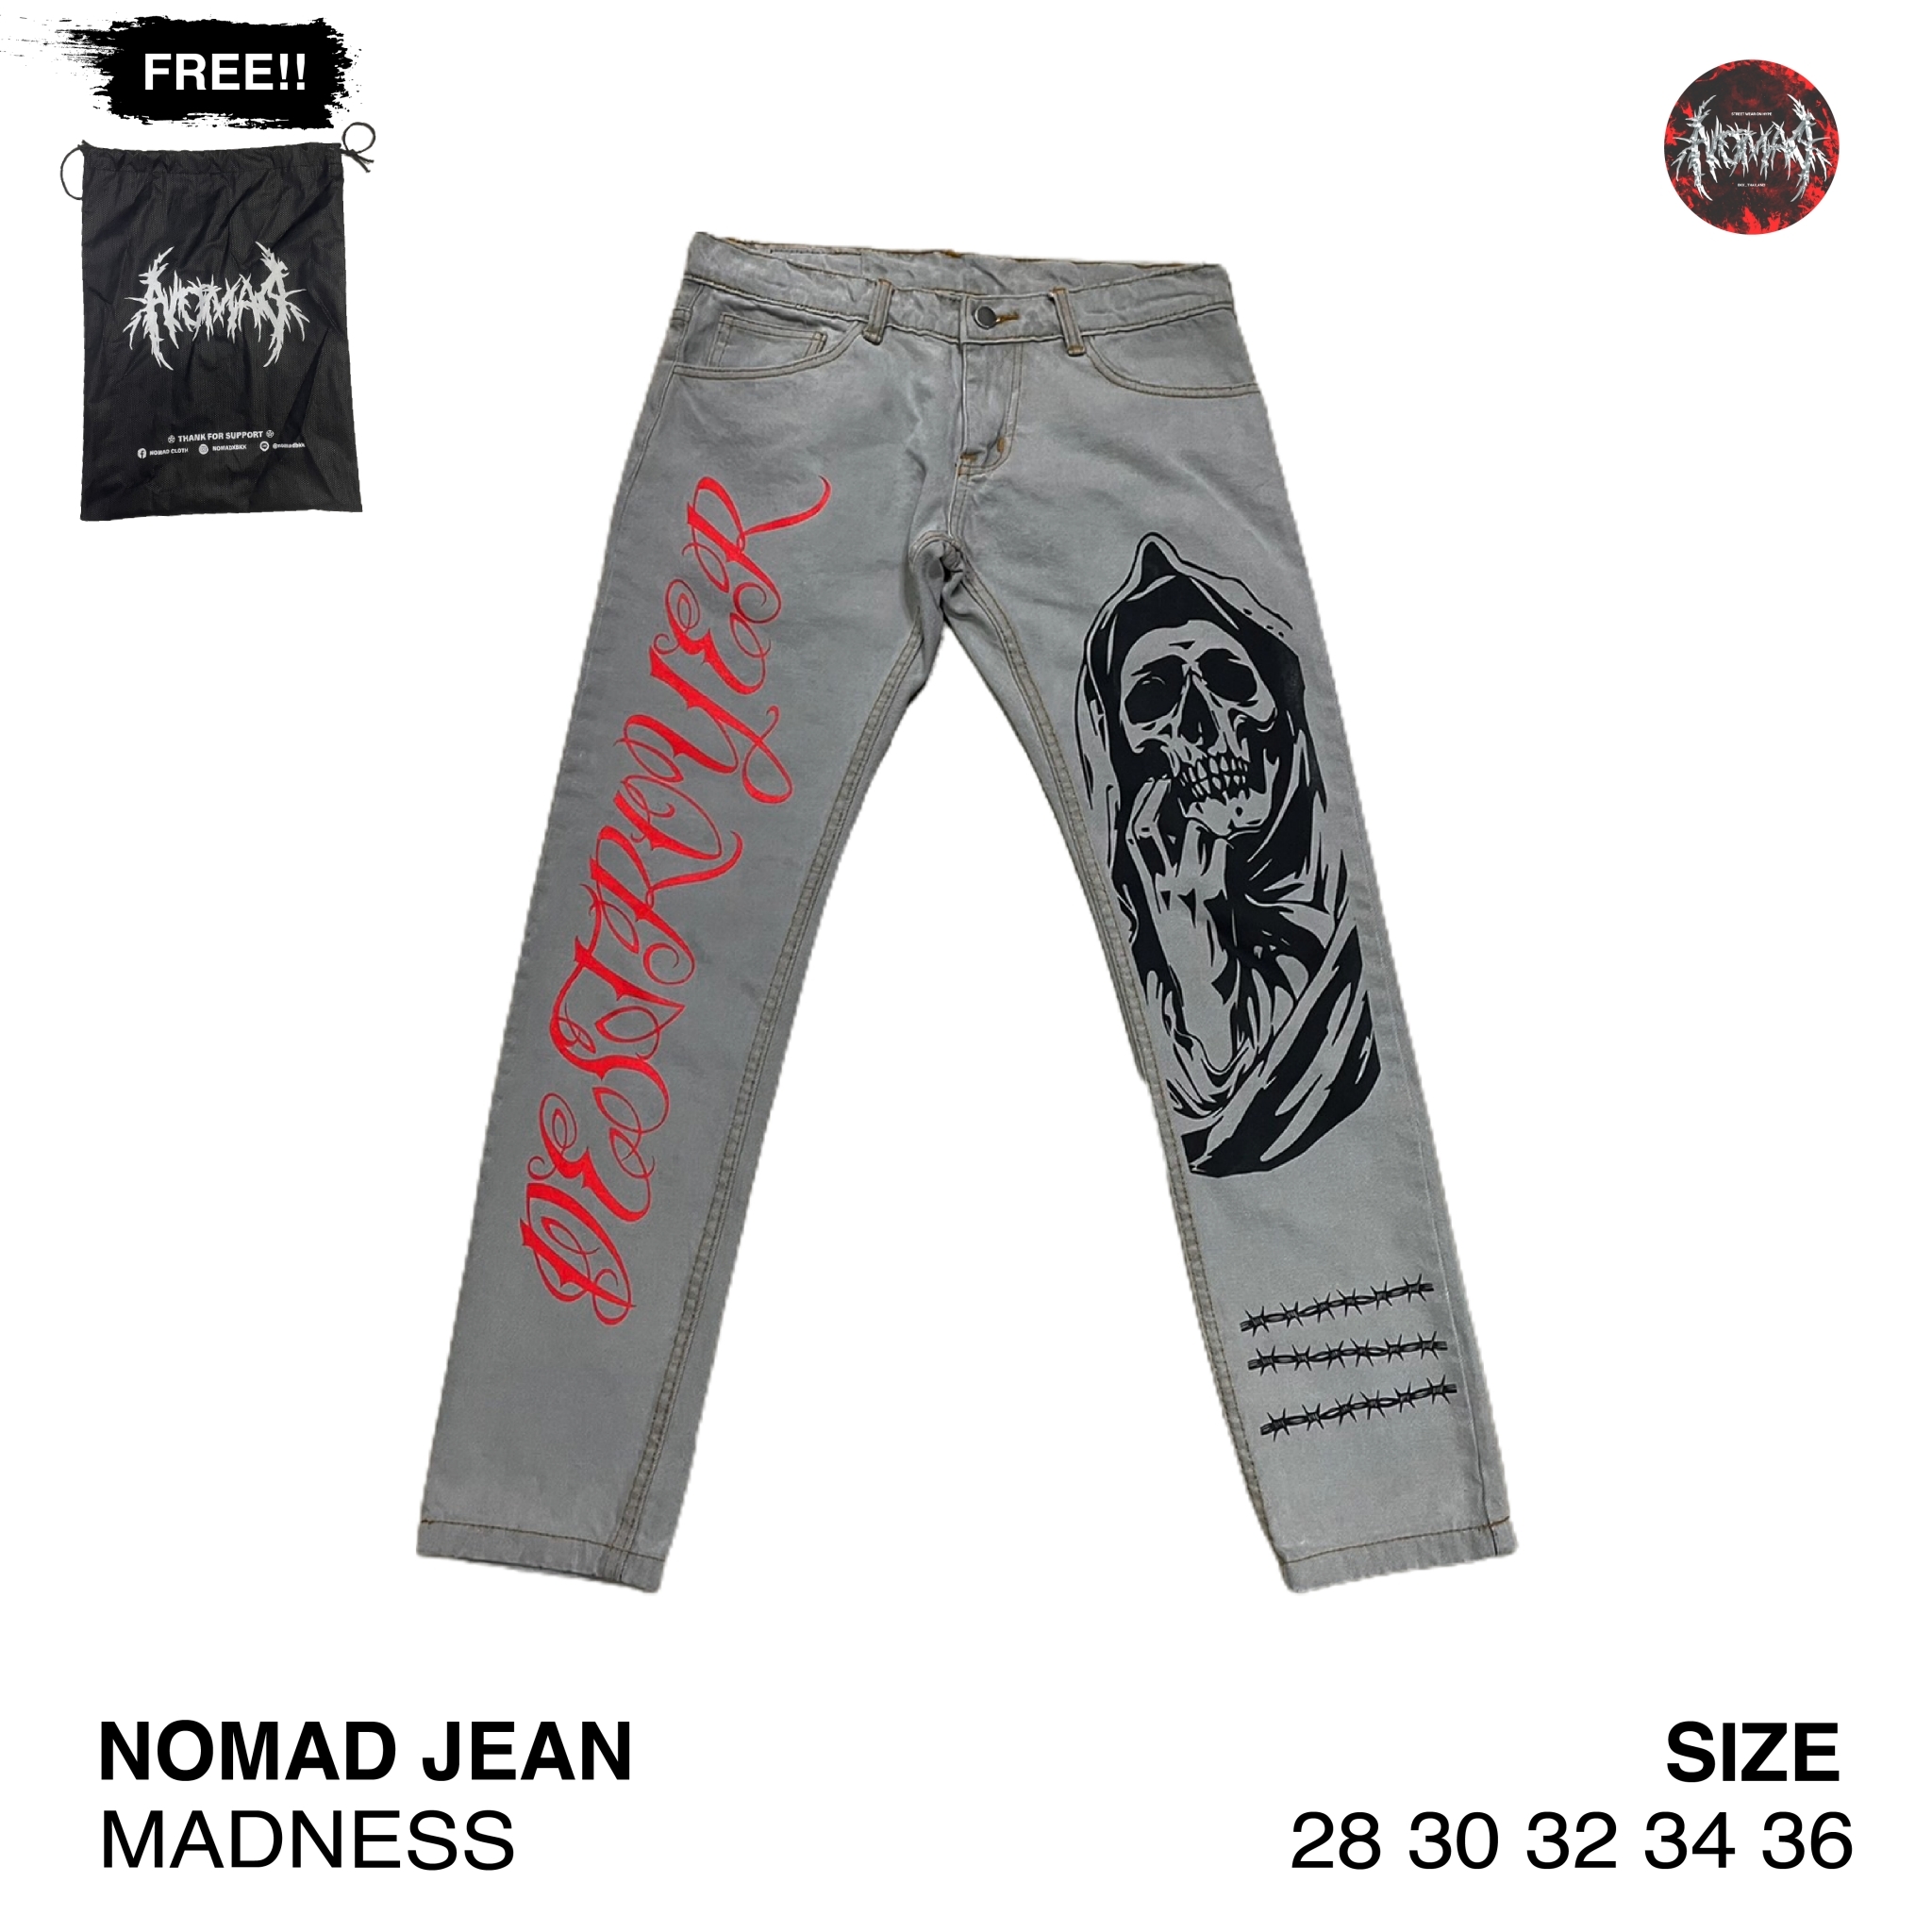 NOMAD JEAN Madness